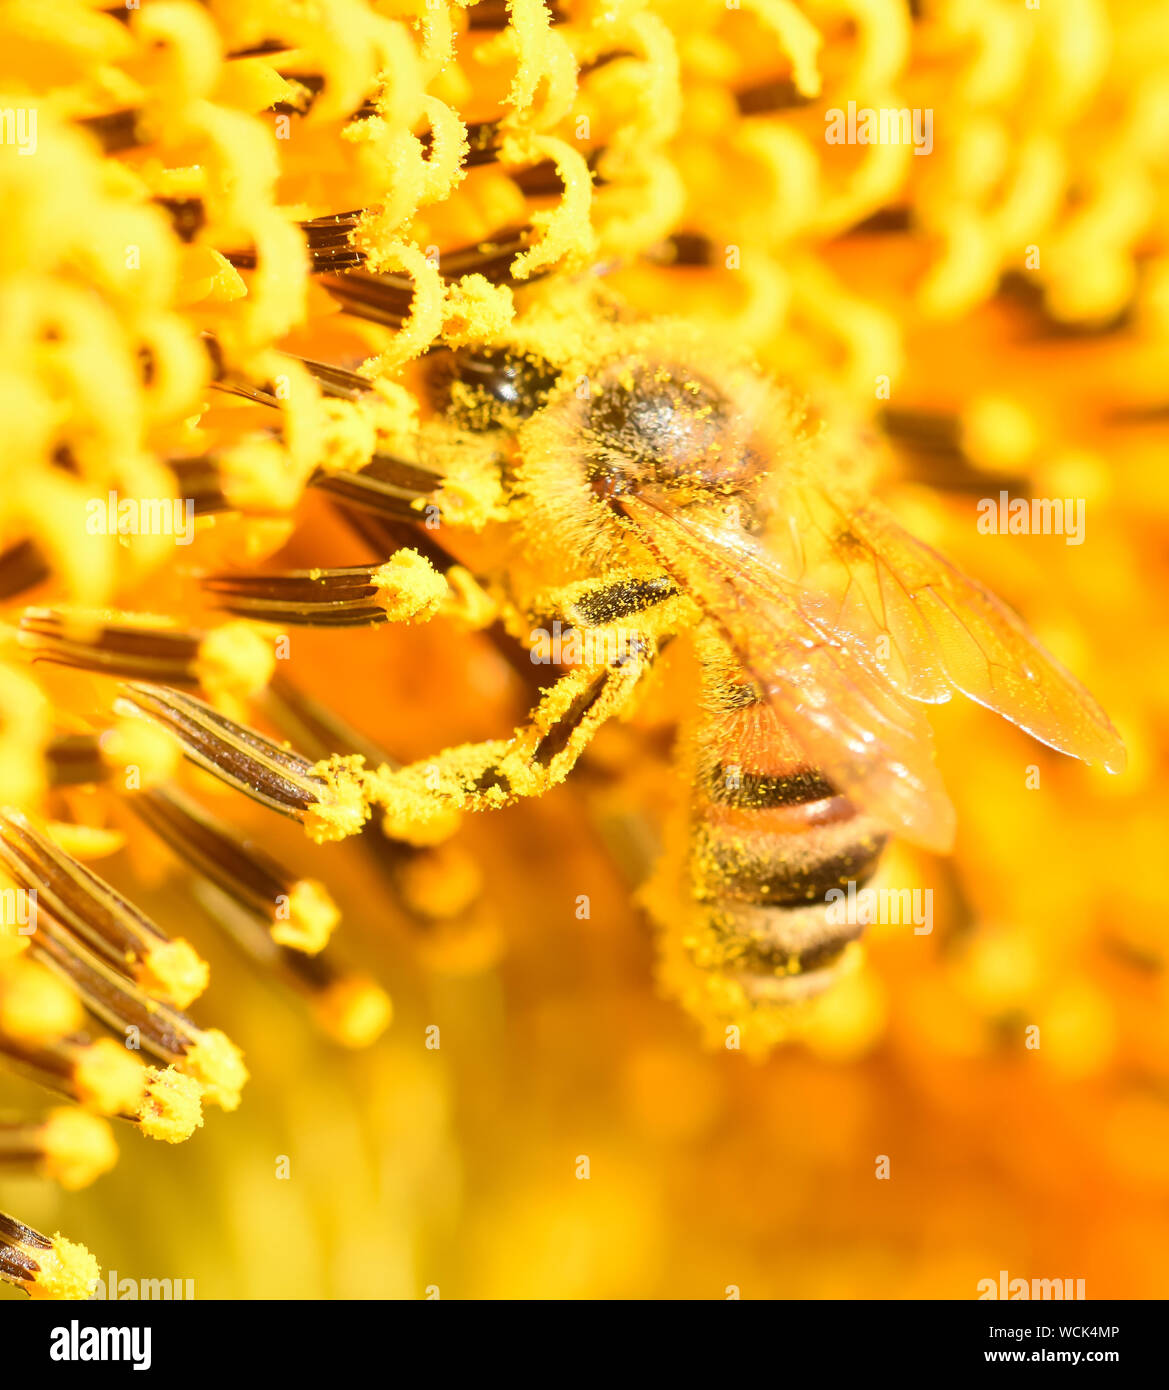 Bee covered in pollen Stock Photo